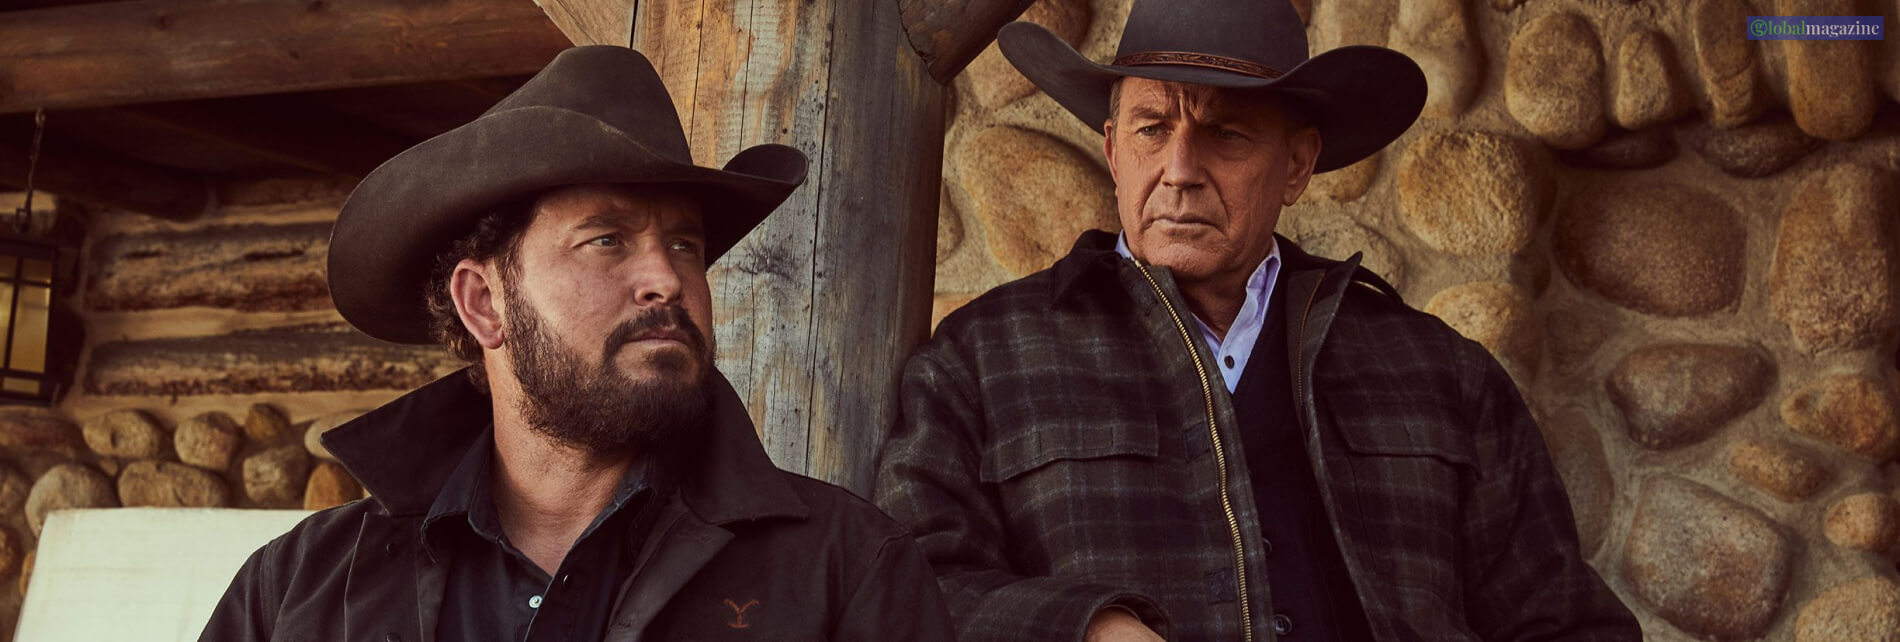 Yellowstone Season 4 Family Bonds Tested In The Face Of Danger